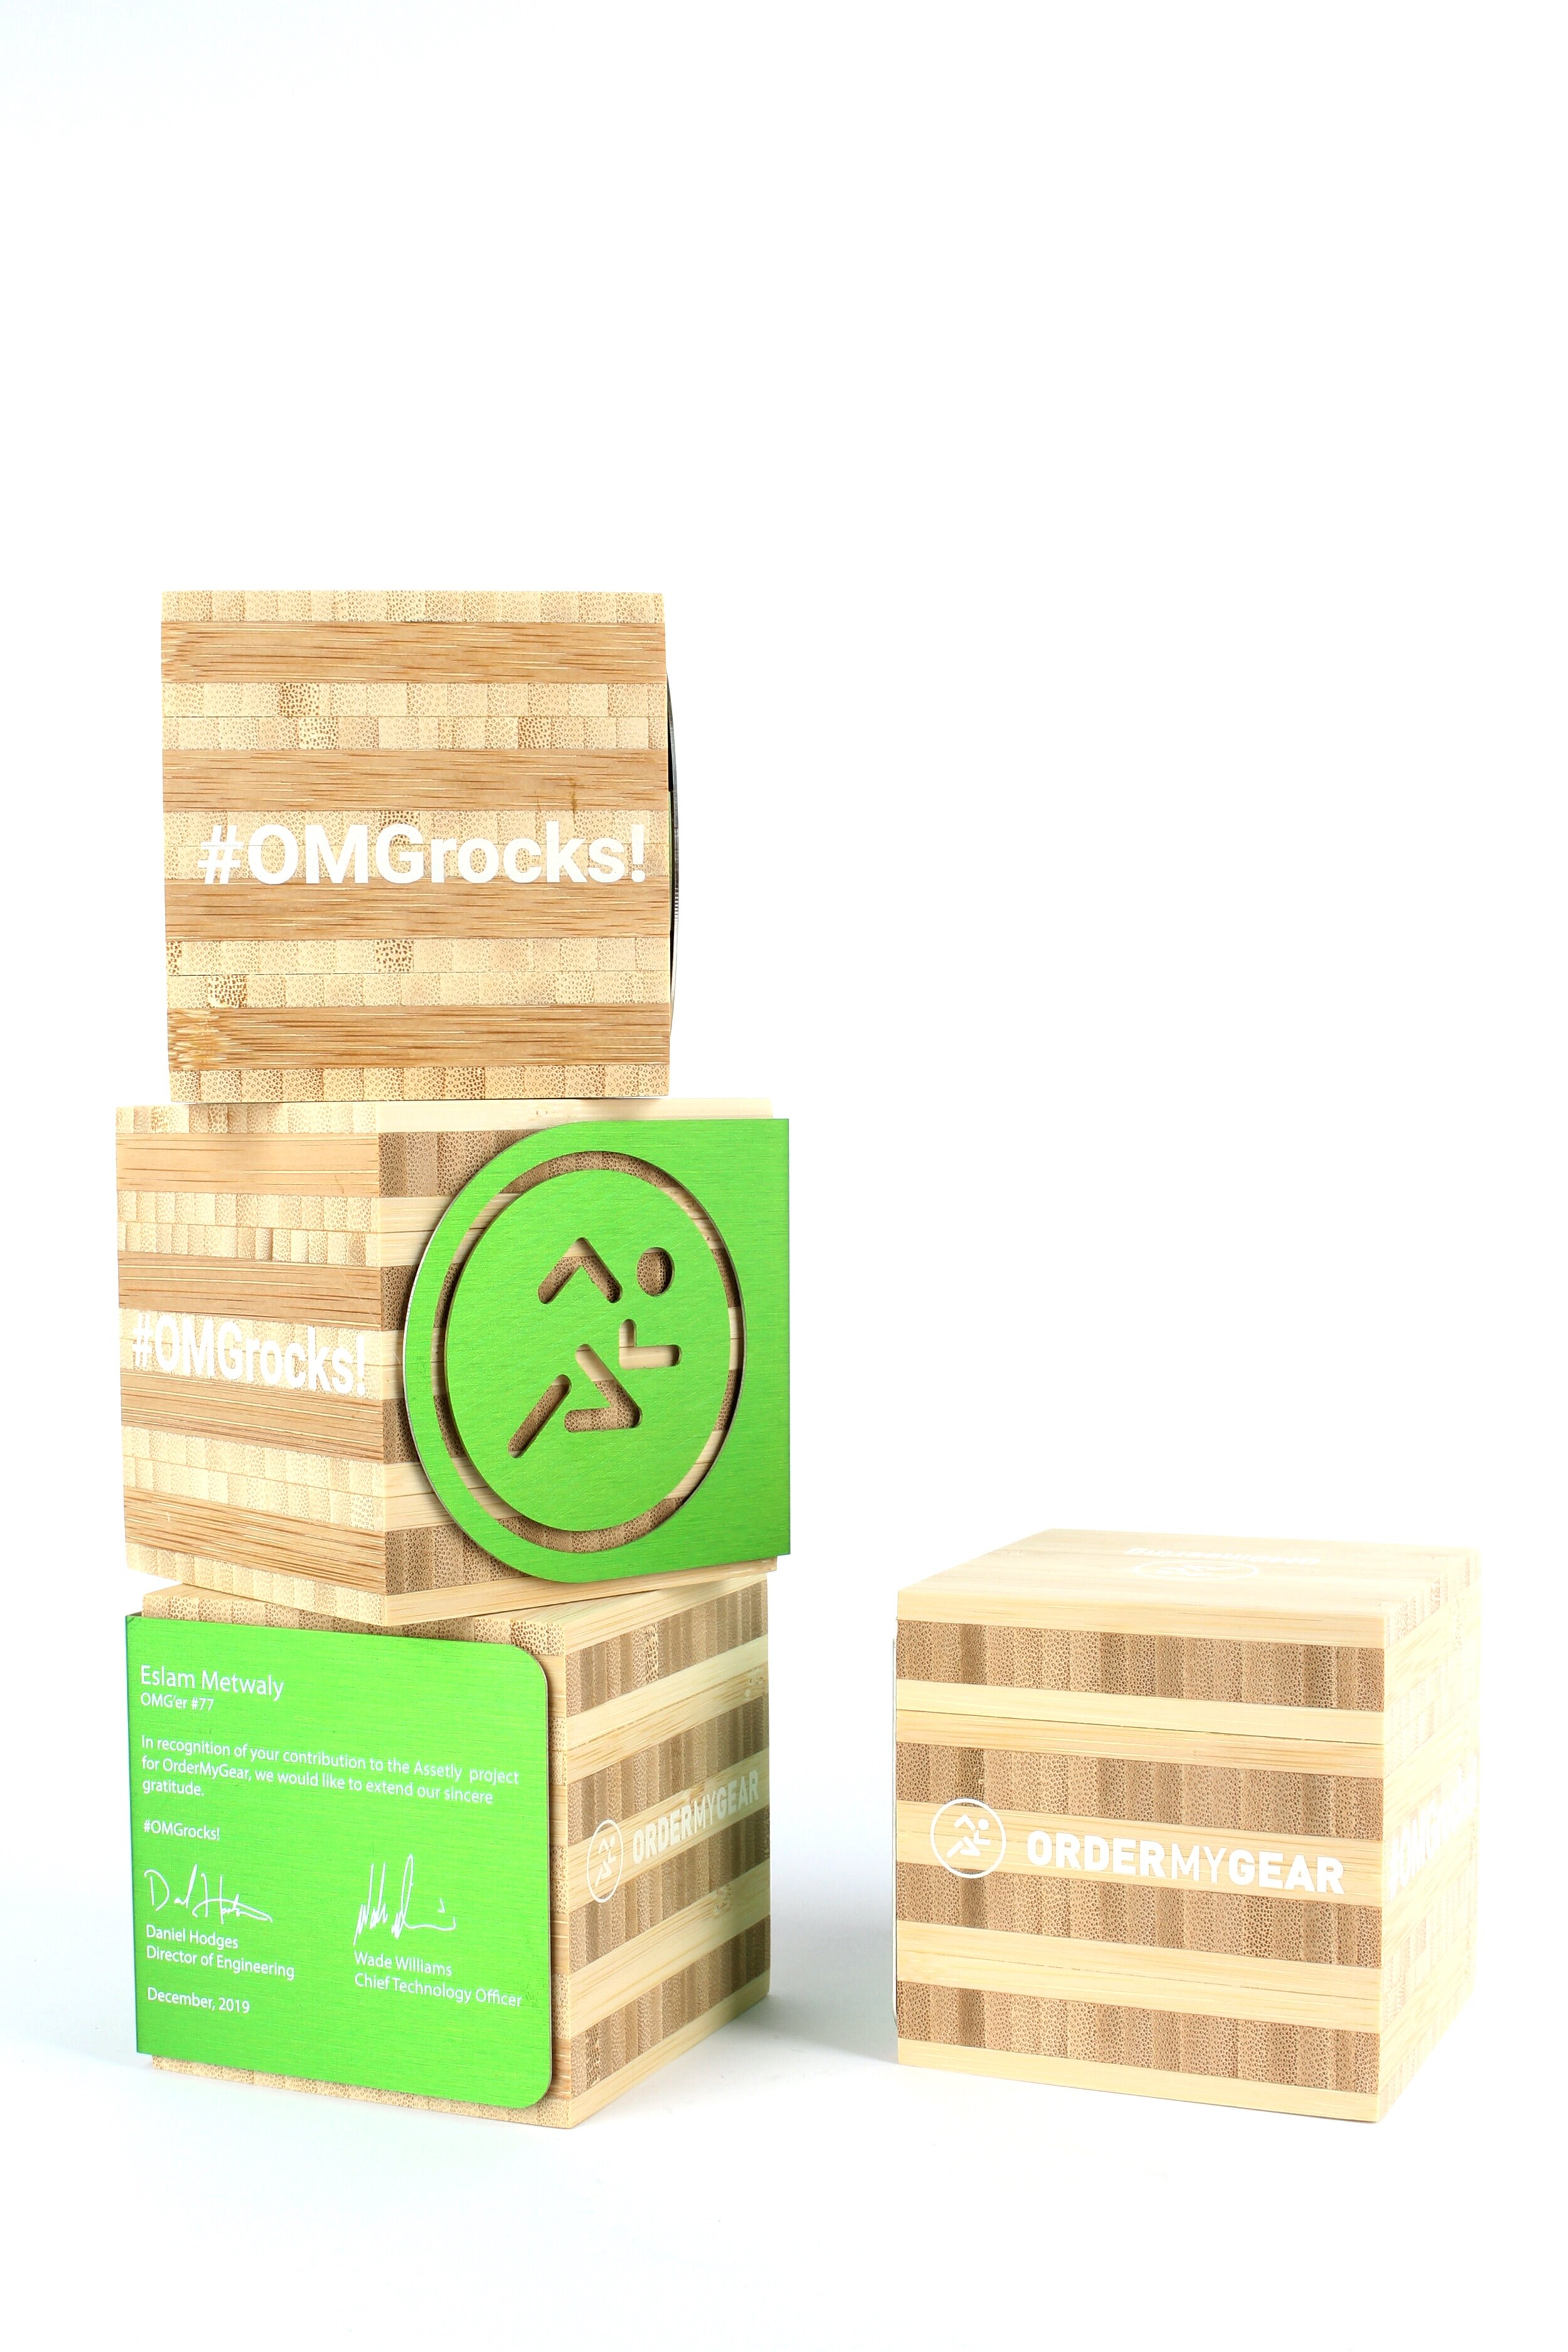 OrderMyGear.4 A simple and modern award. These cubes are versatile and showcase the beautiful grain of bamboo.